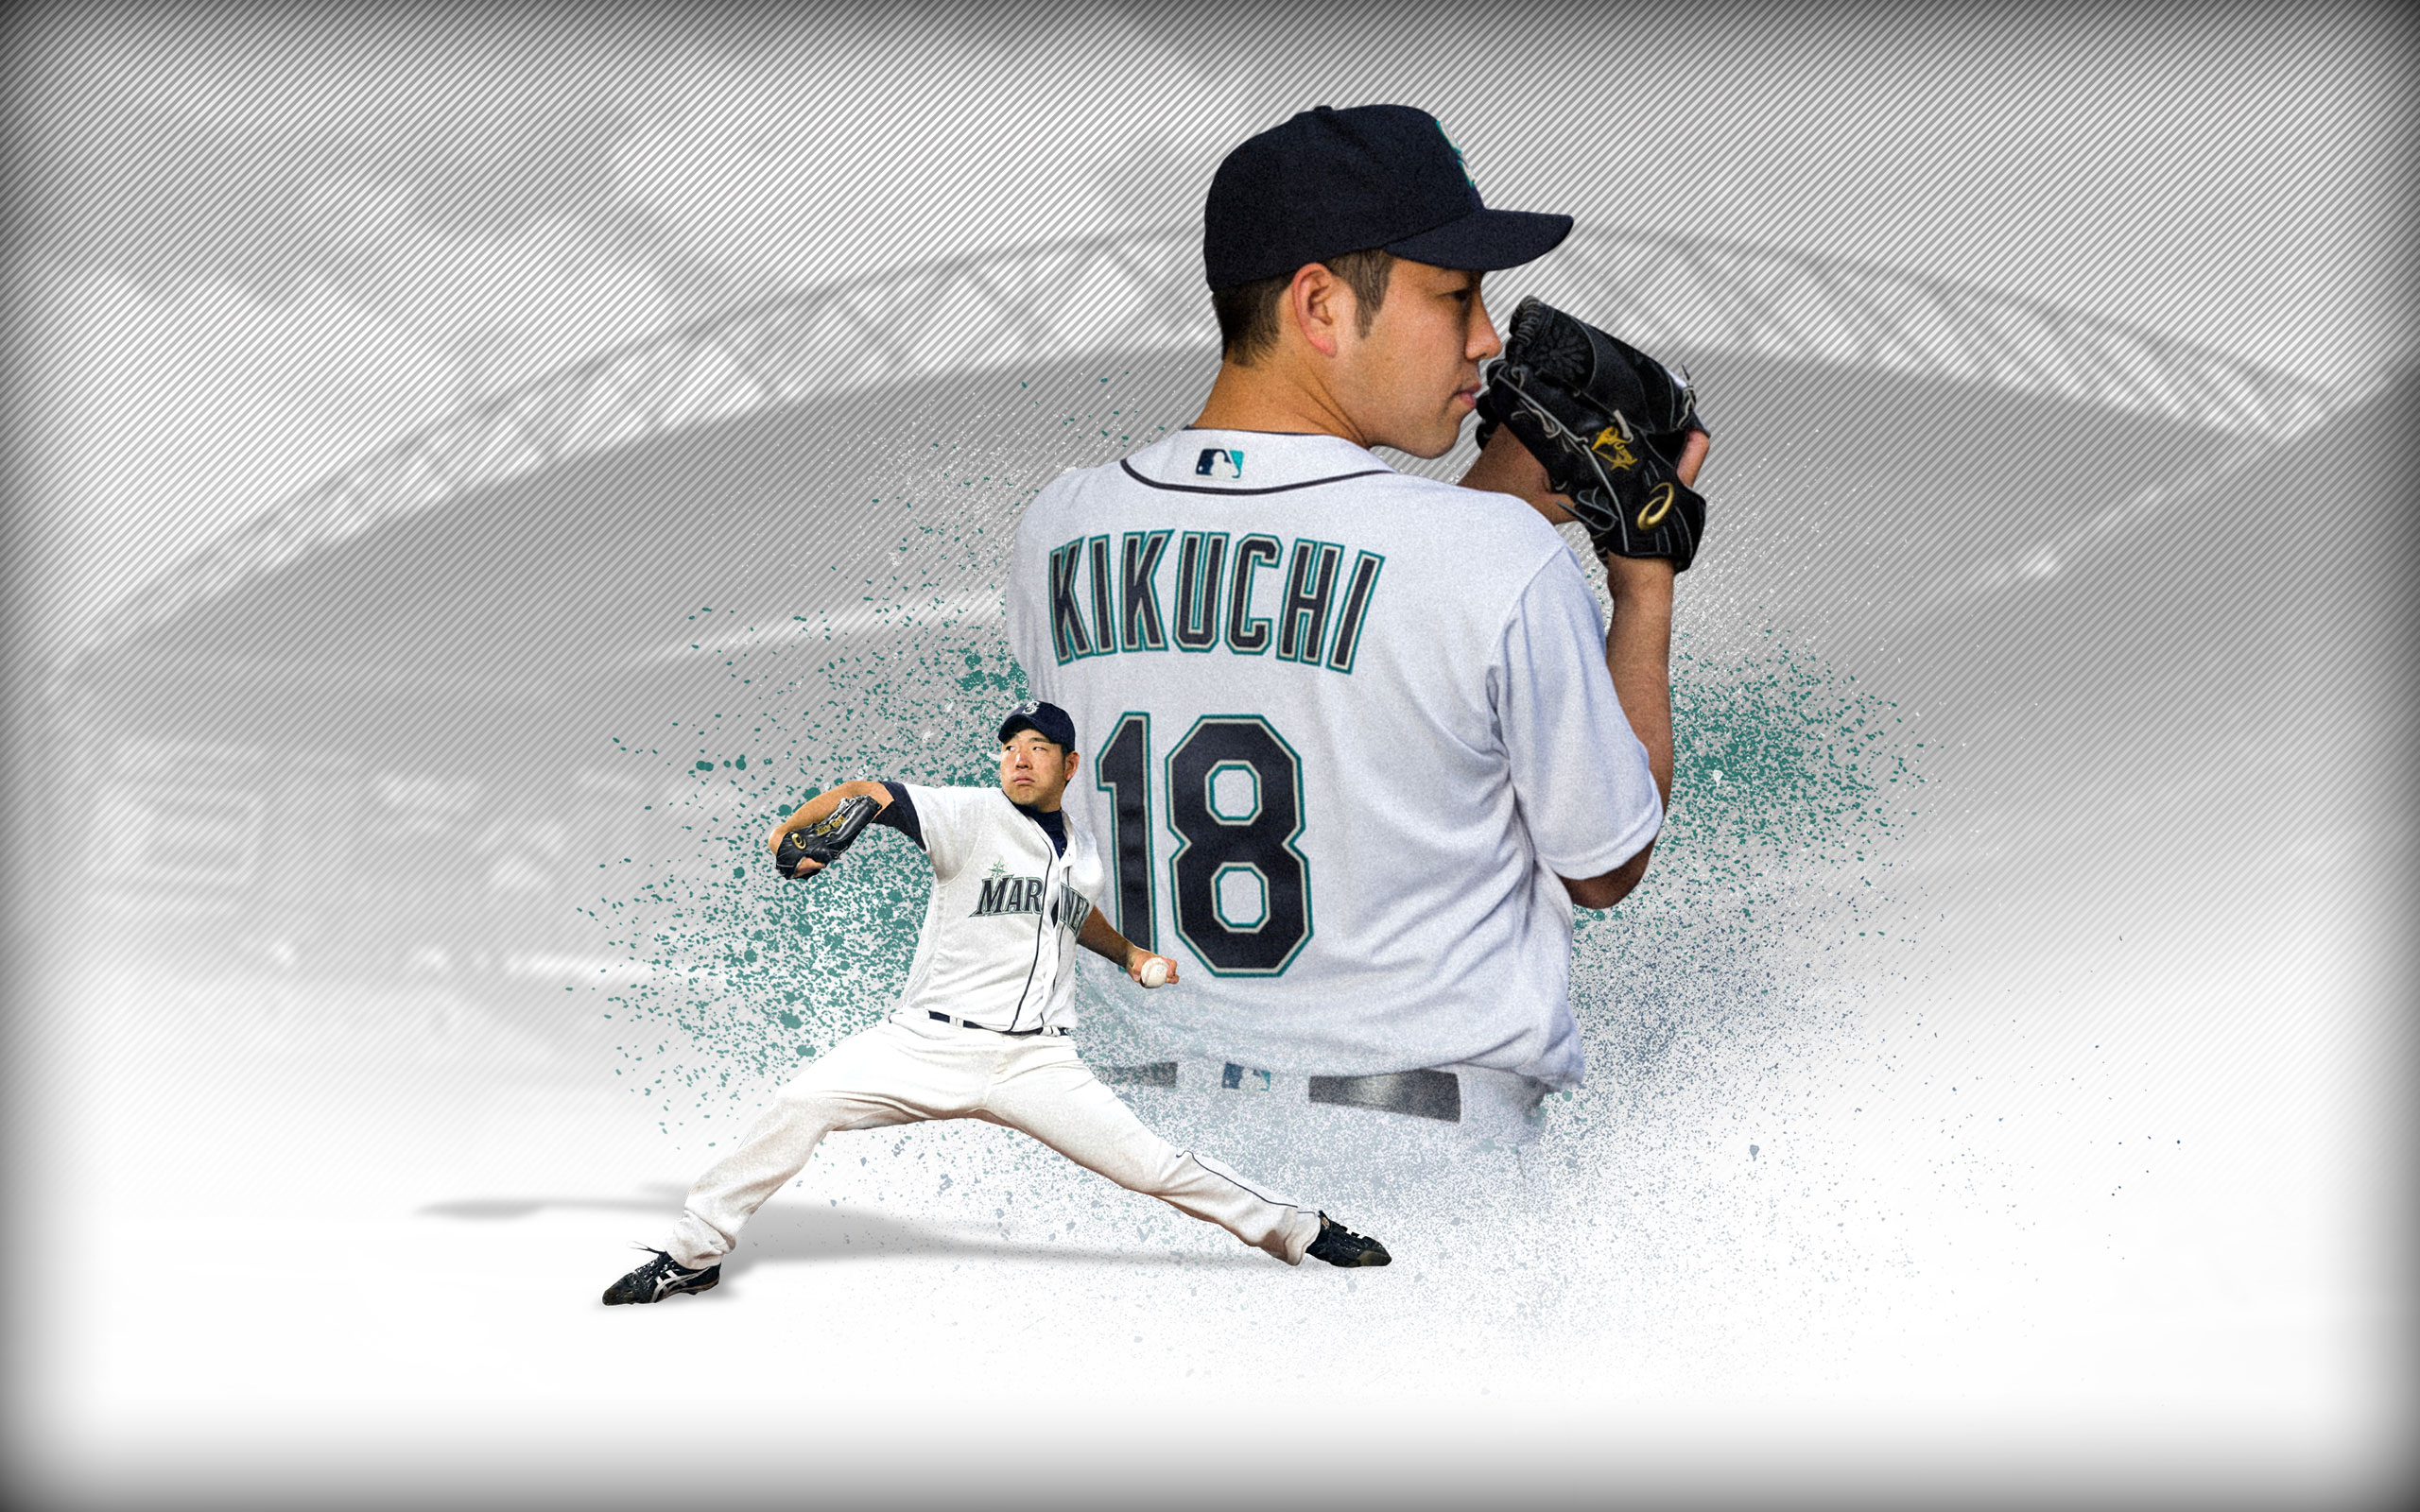 Mariners Players Wallpaper Seattle